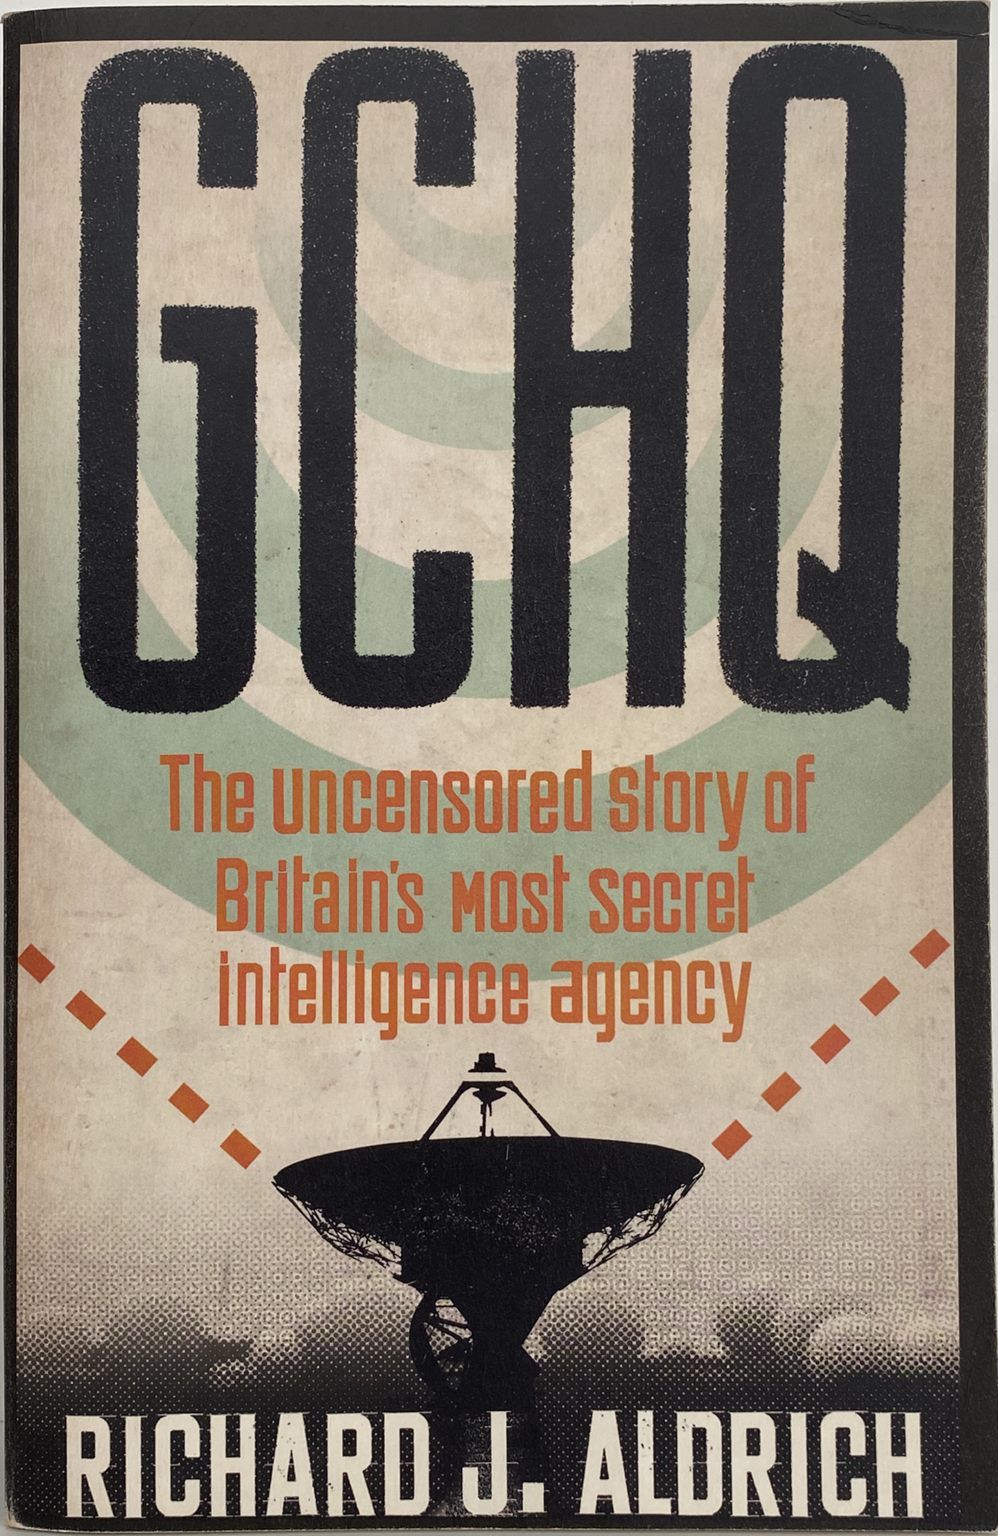 GCHQ: The Uncensored story of Britain's most secret intelligence agency